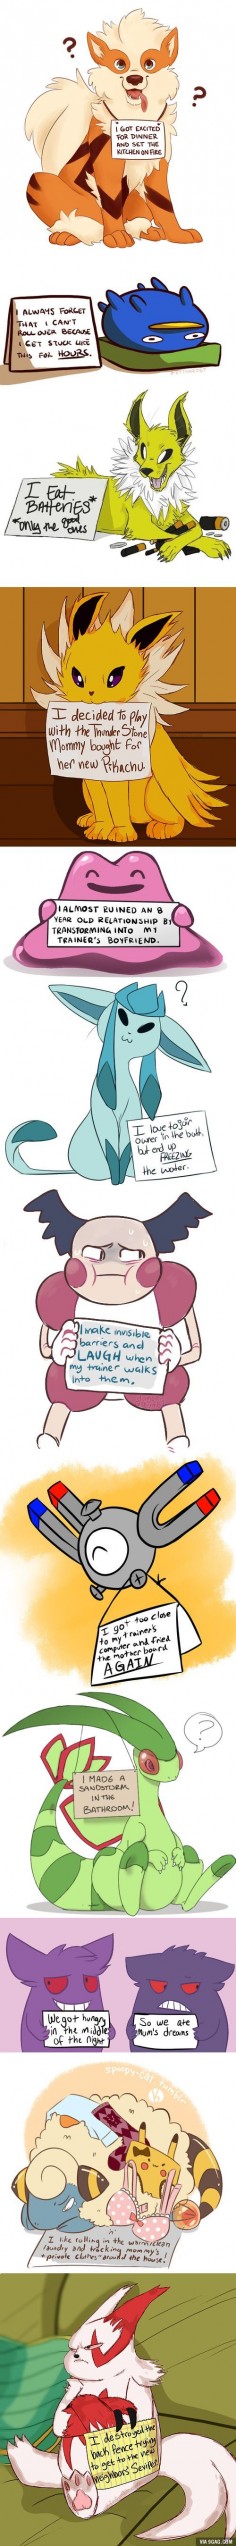 Pokemon have problems  not  AND FOLLOW ME IF YOU THINK THIS IS FUNNY.